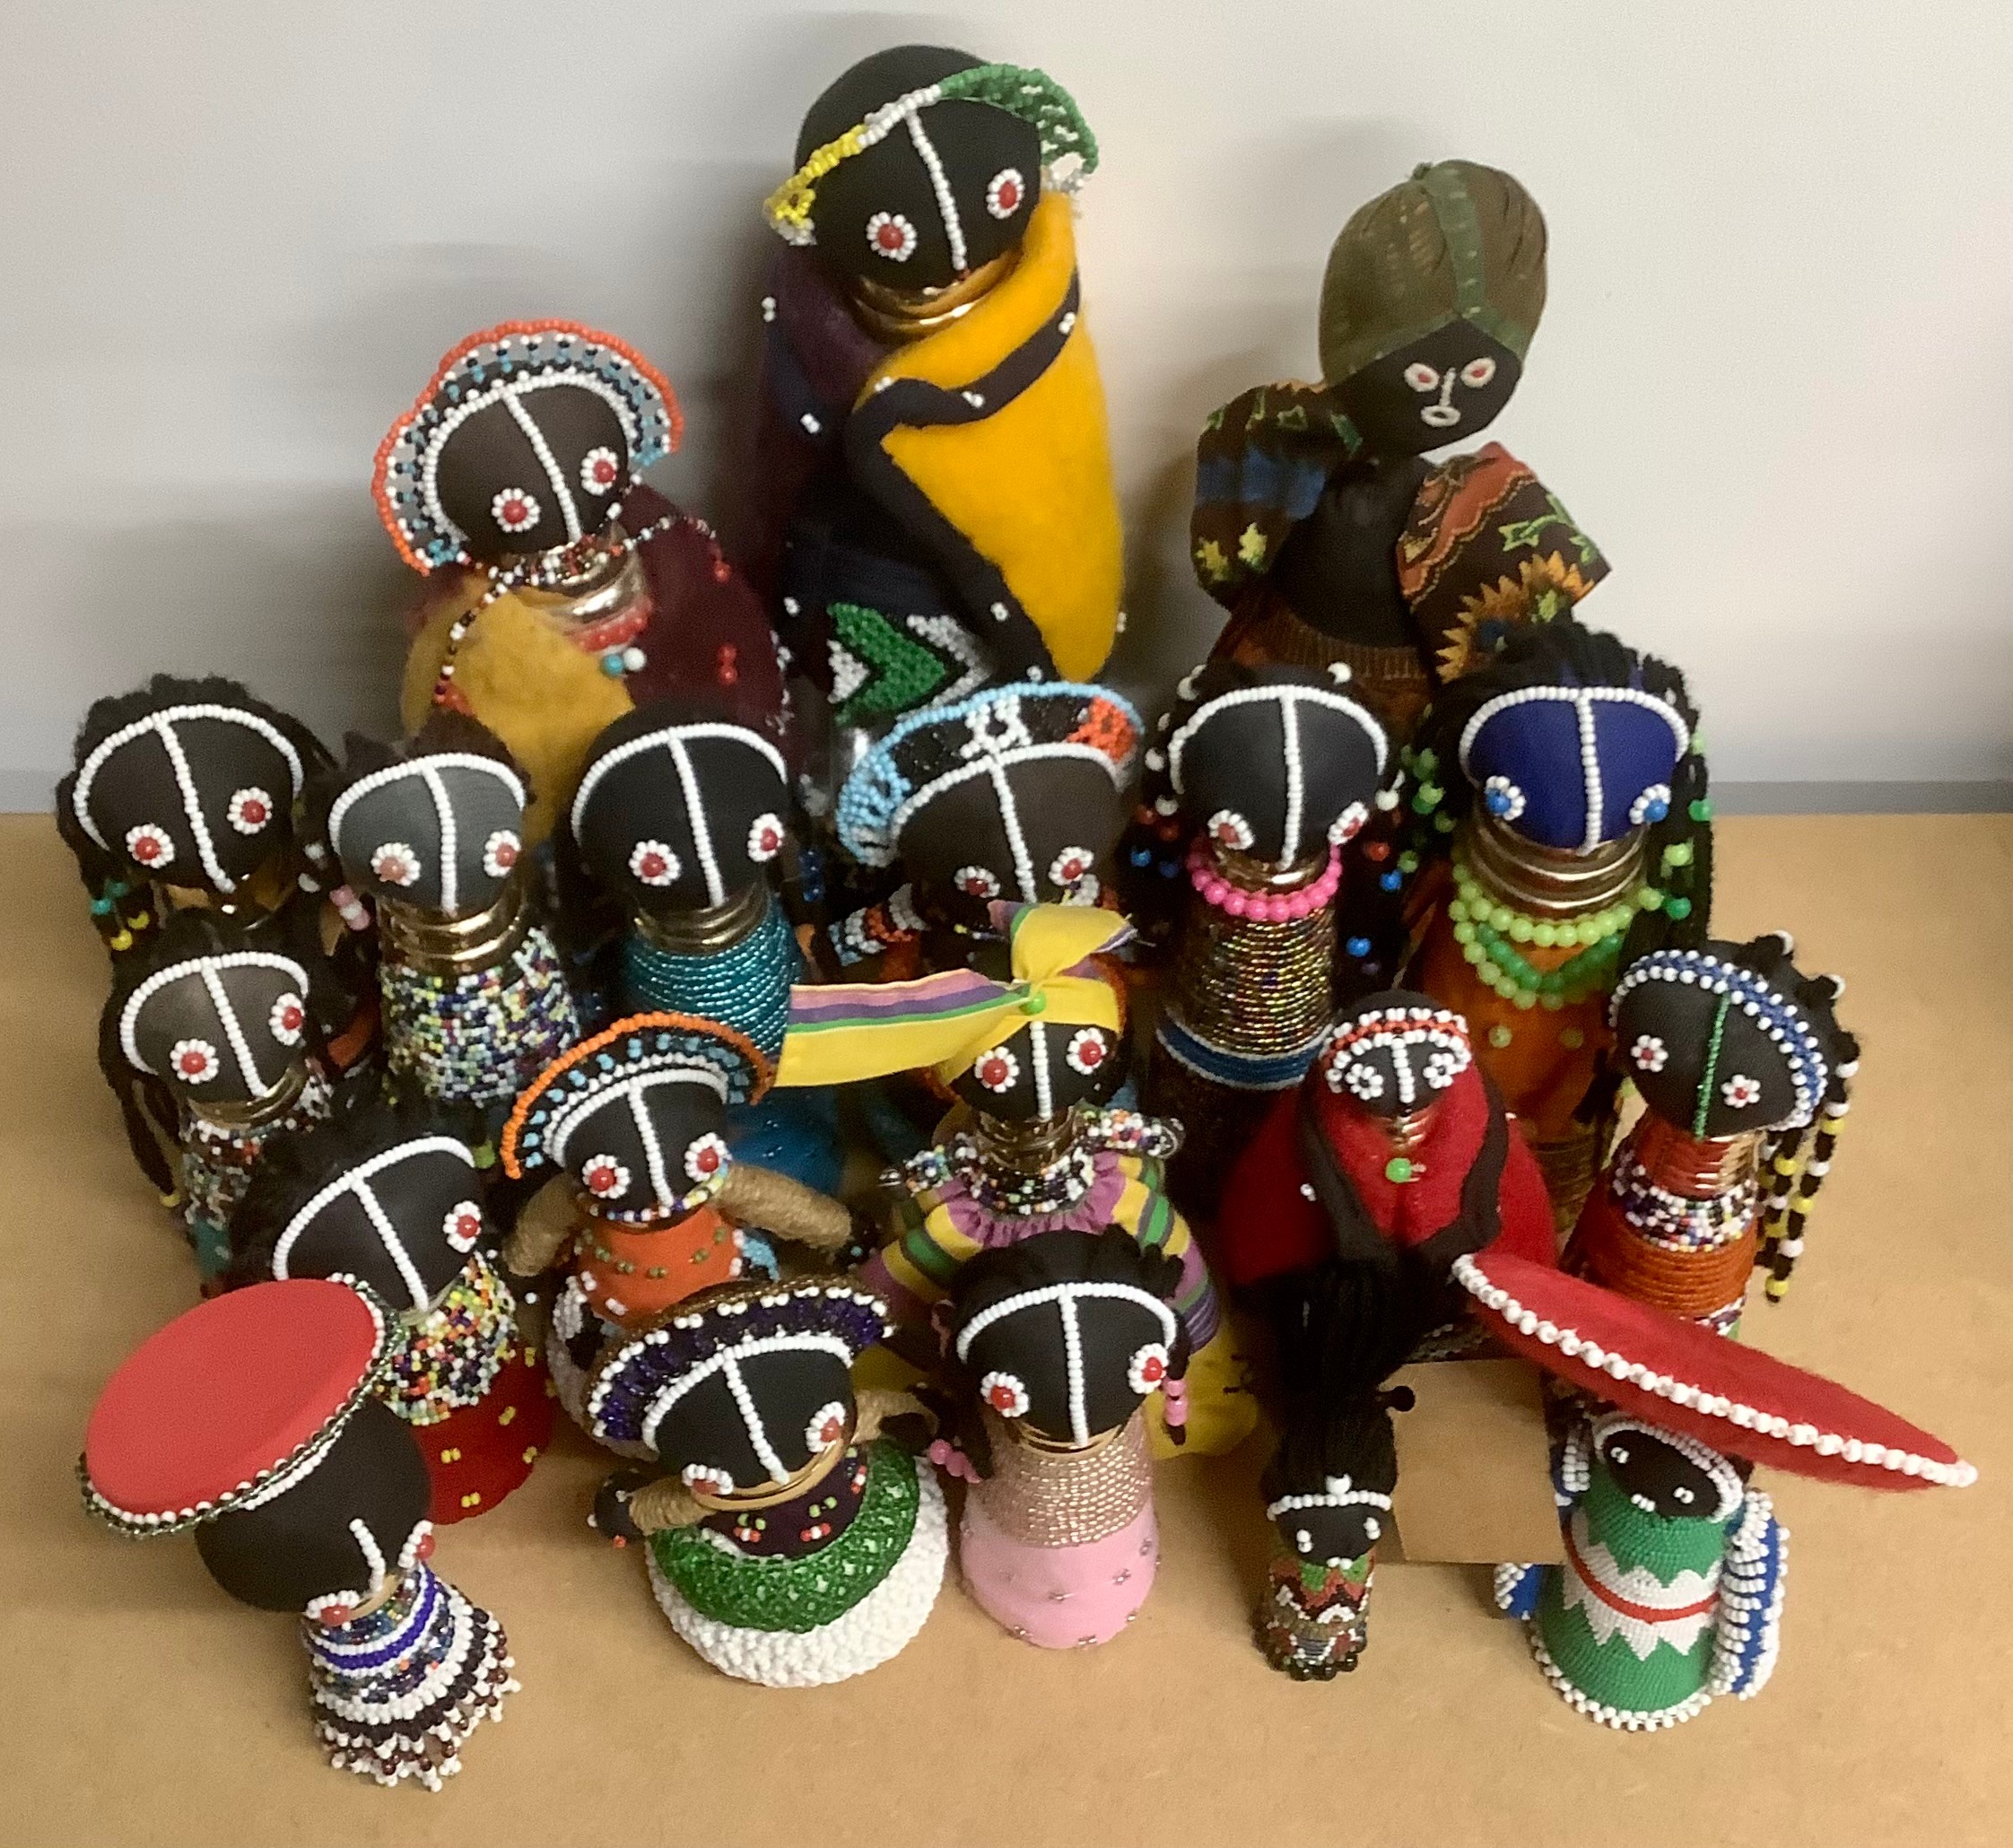 Tribal Art & the Eclectic Interior - a collection of Ndebele beadwork fertility and initiation - Image 2 of 2